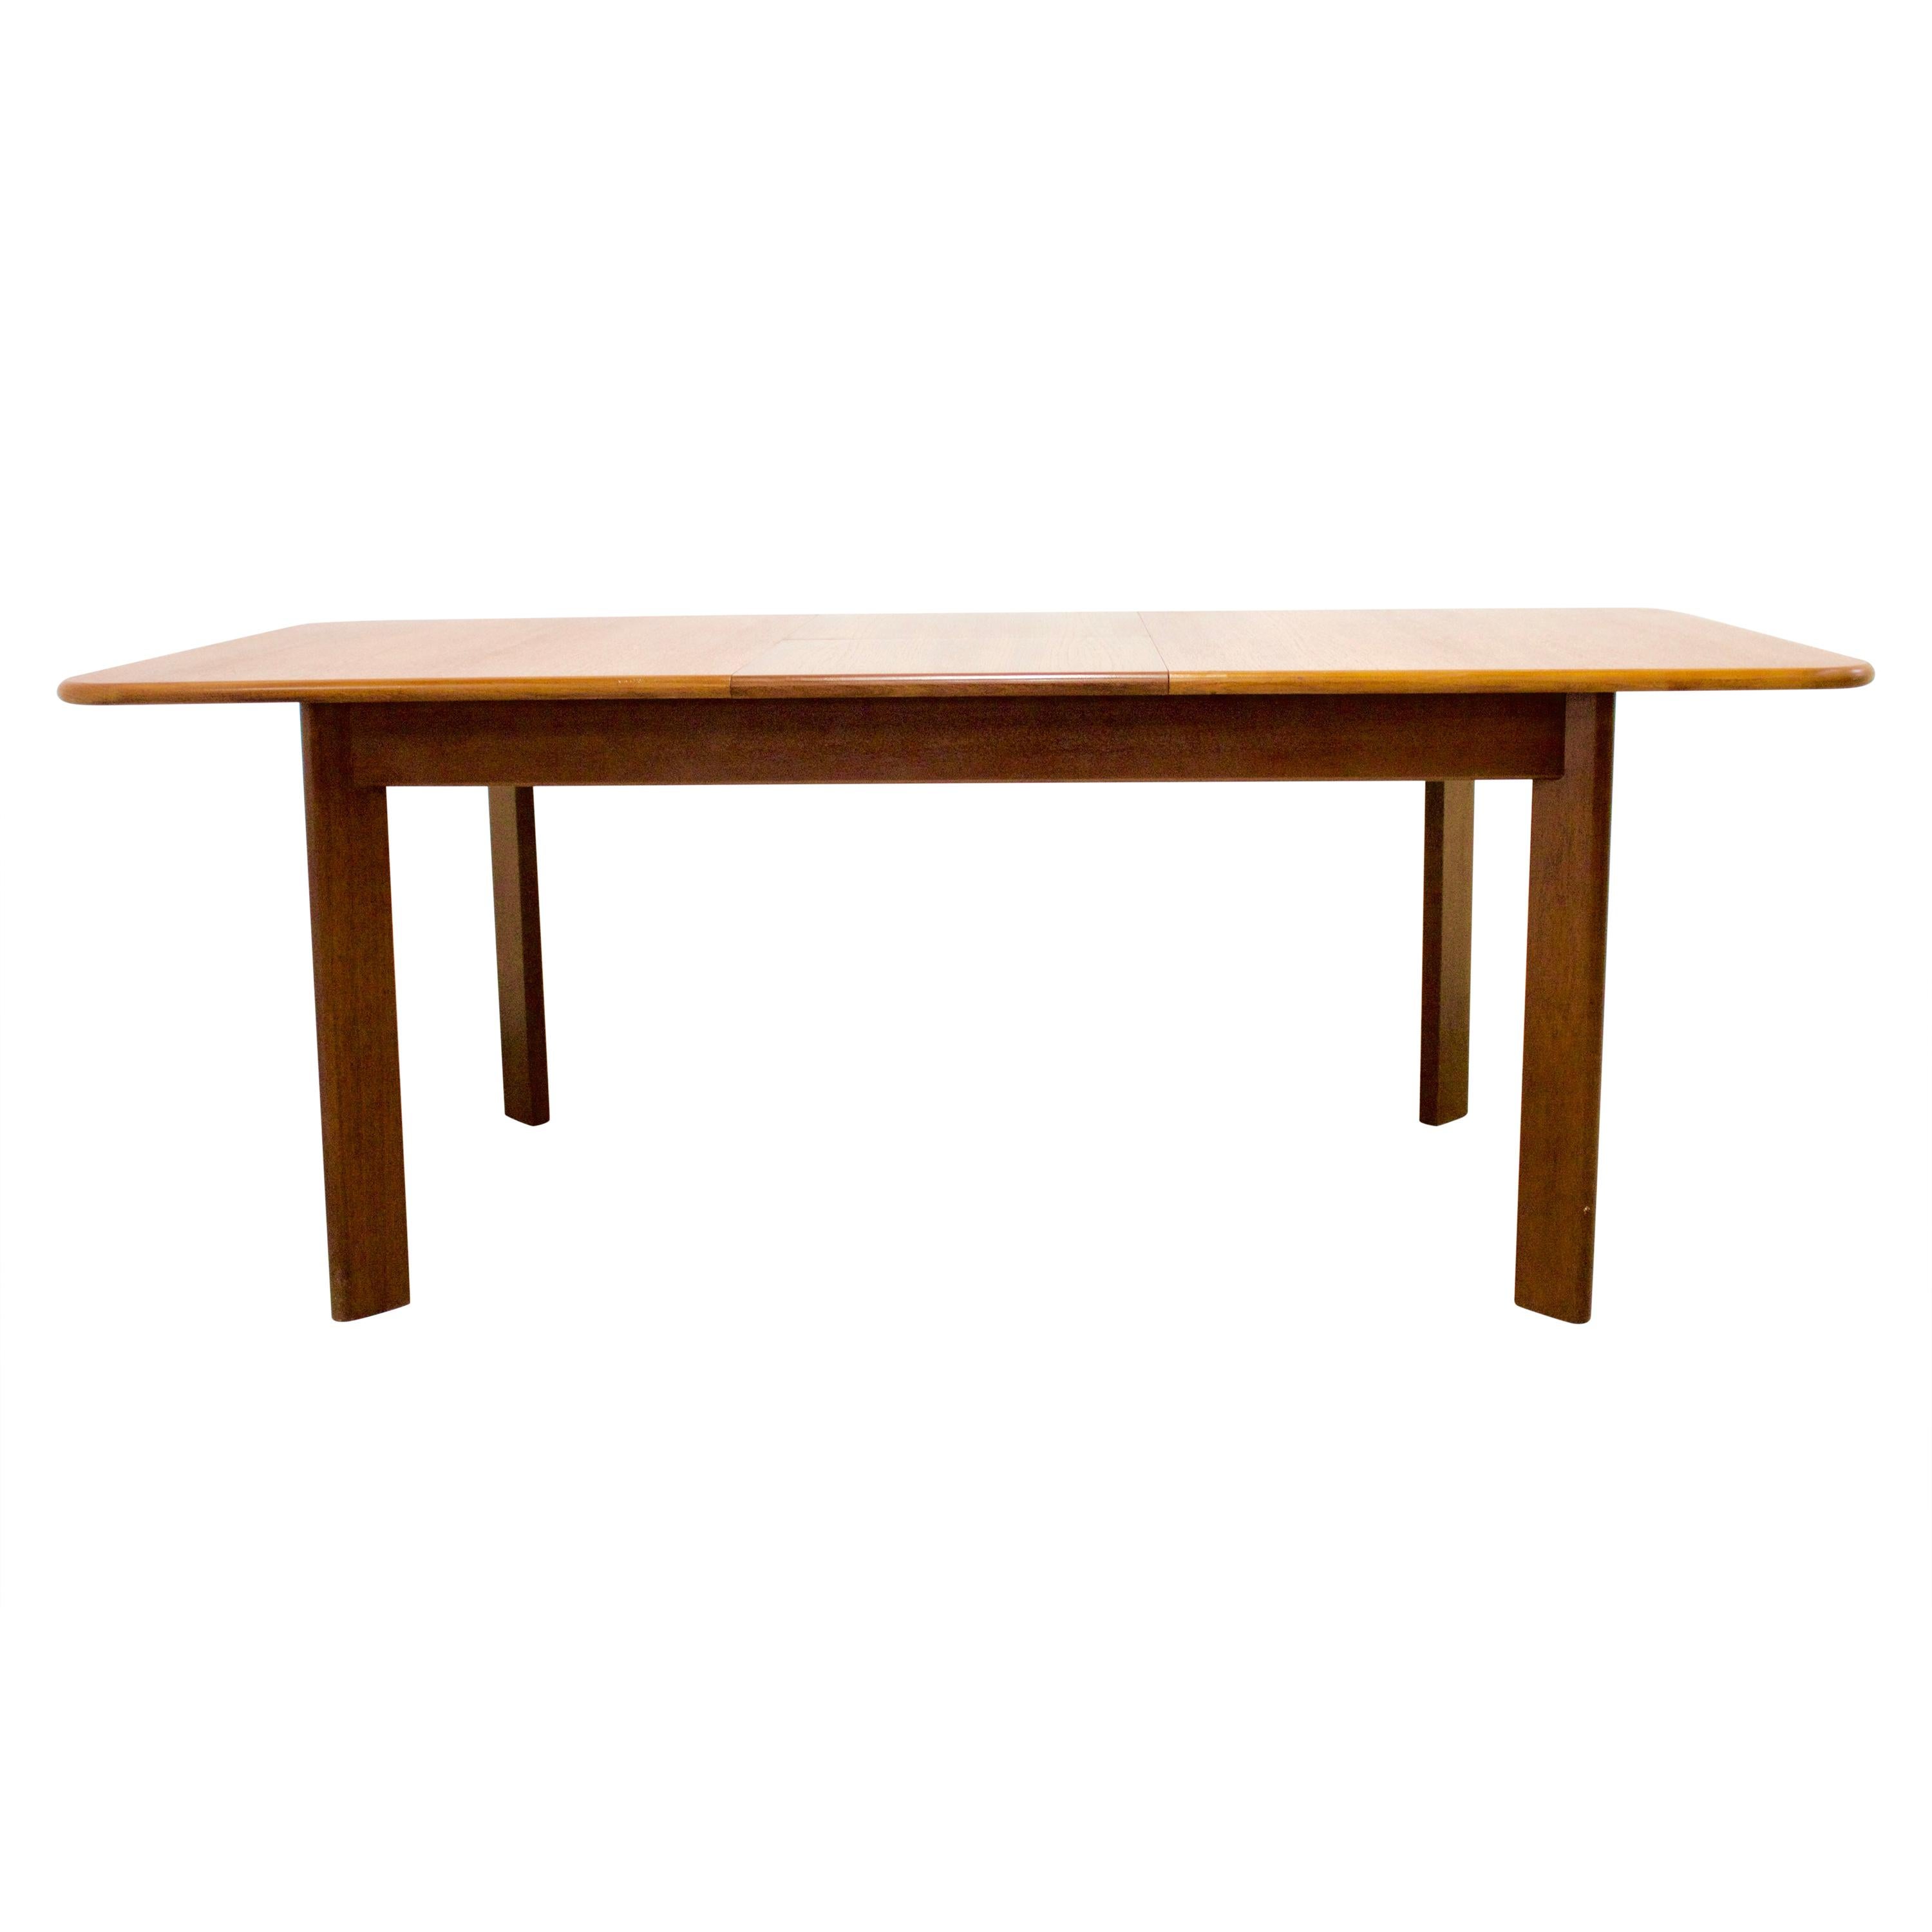 Midcentury Teak Extending Dining Table by G-Plan, 1970s For Sale